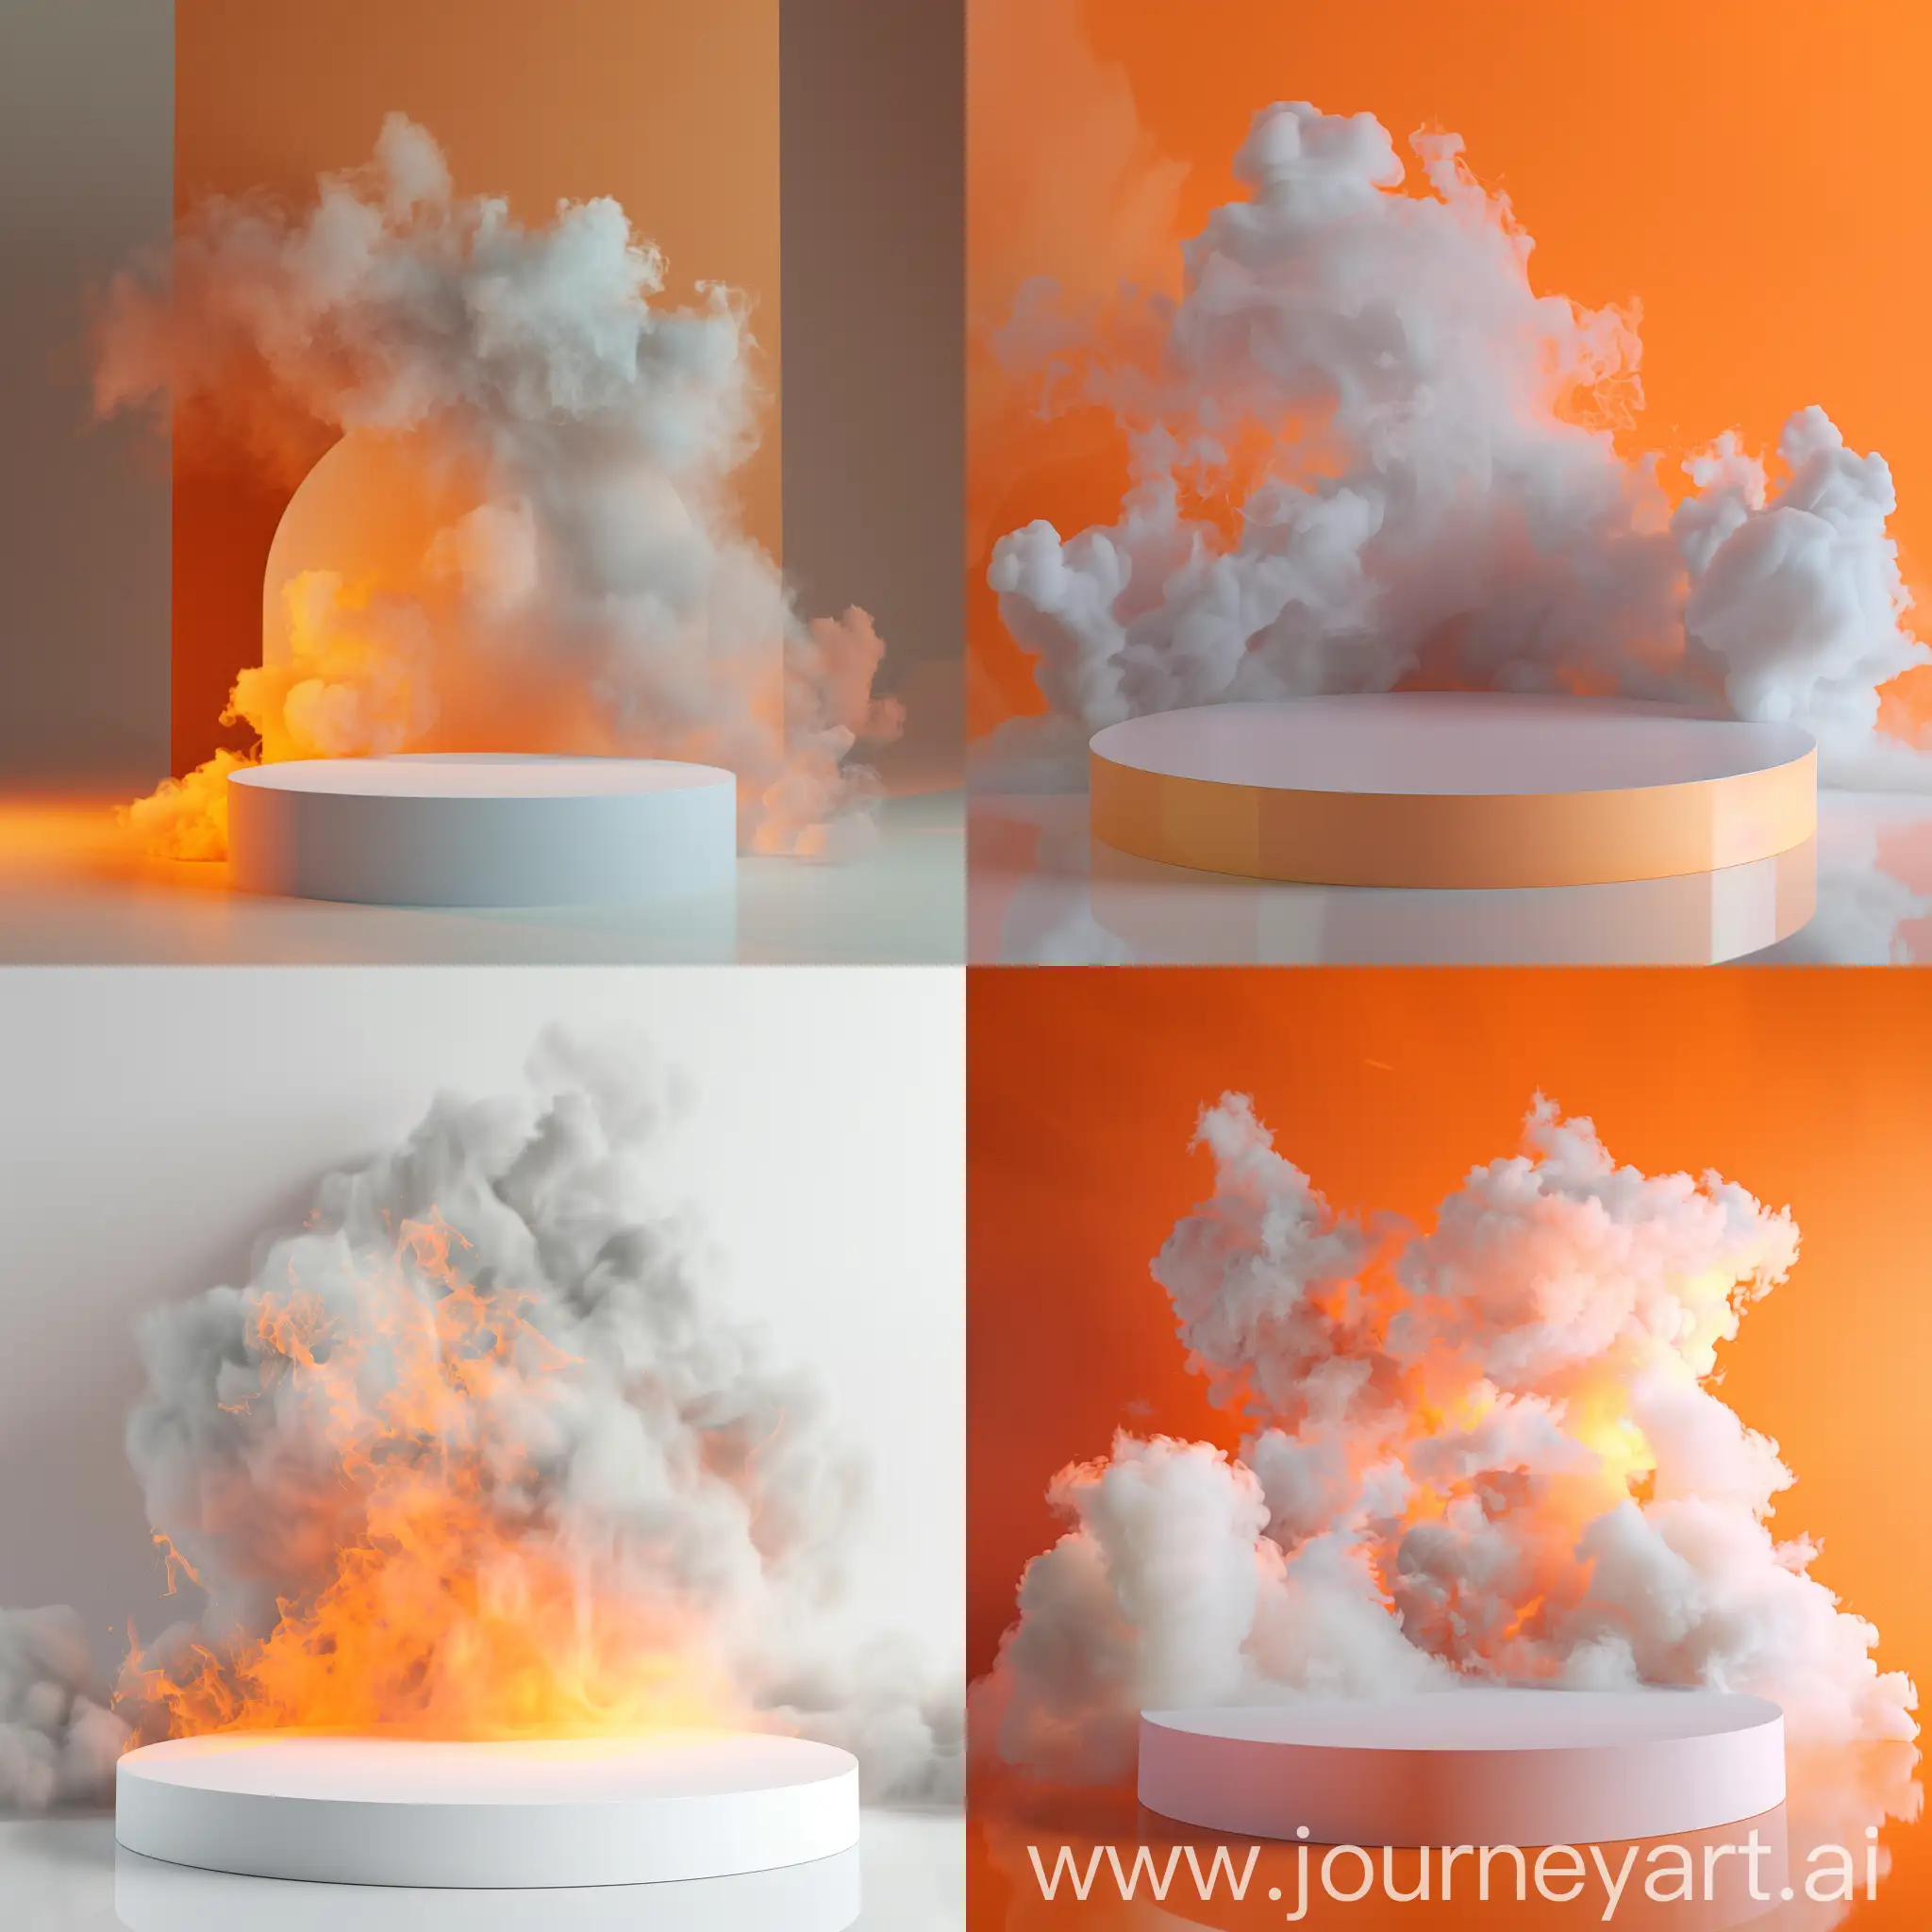 Make me a podium that is white and the background is white and orange, 3D, very realistic, atmosphere creation with smoke.